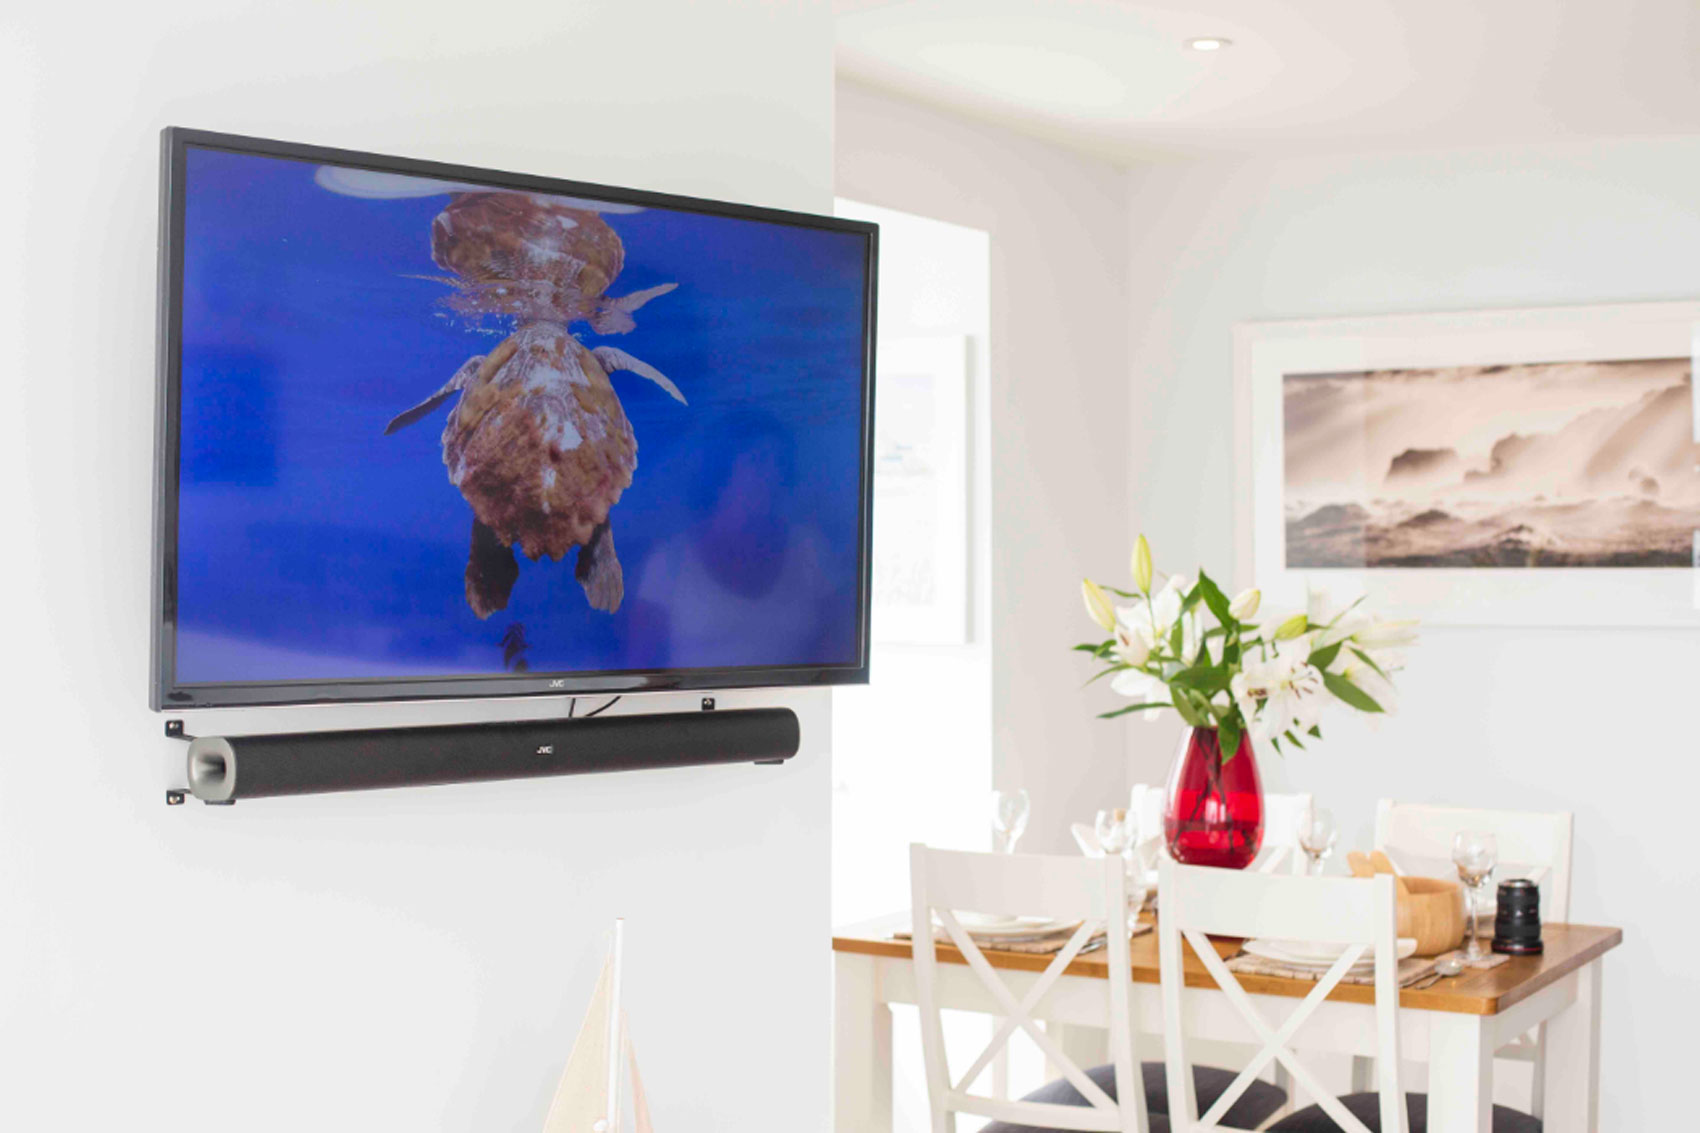 Beach Haven wall mounted tv and soundbar in living area. Open plan dining area in the background.